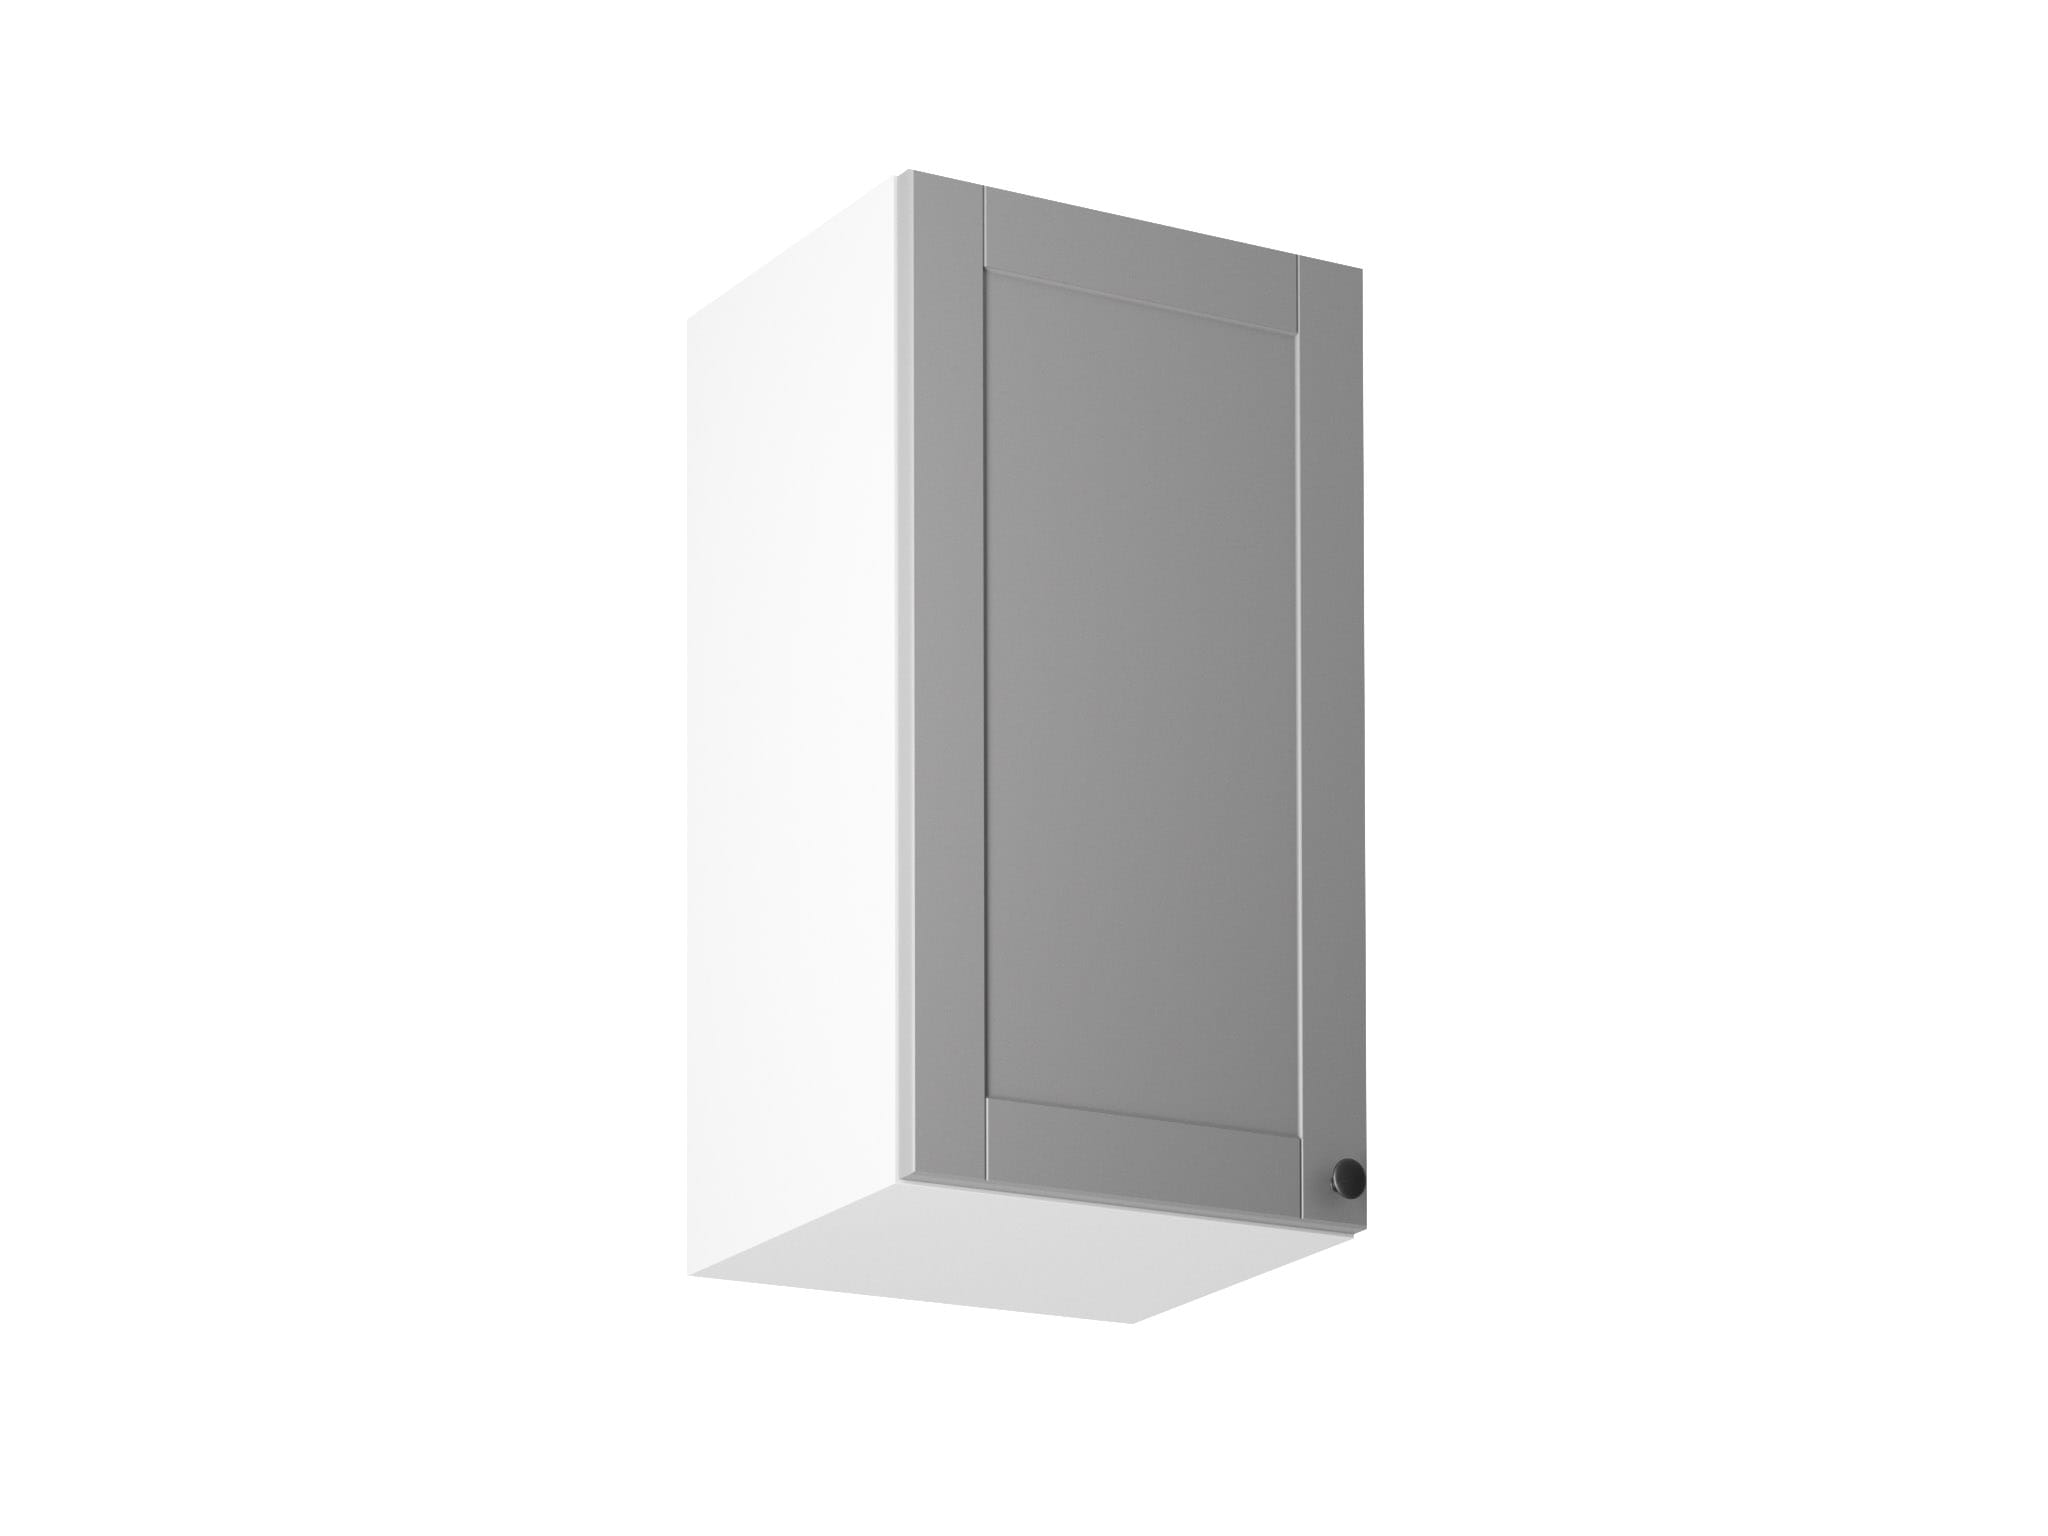 MODERN STYLE MODERN WALL CABINET IN WHITE COLOUR FOR A KITCHENETTE IN A KITCHEN ROOM G40